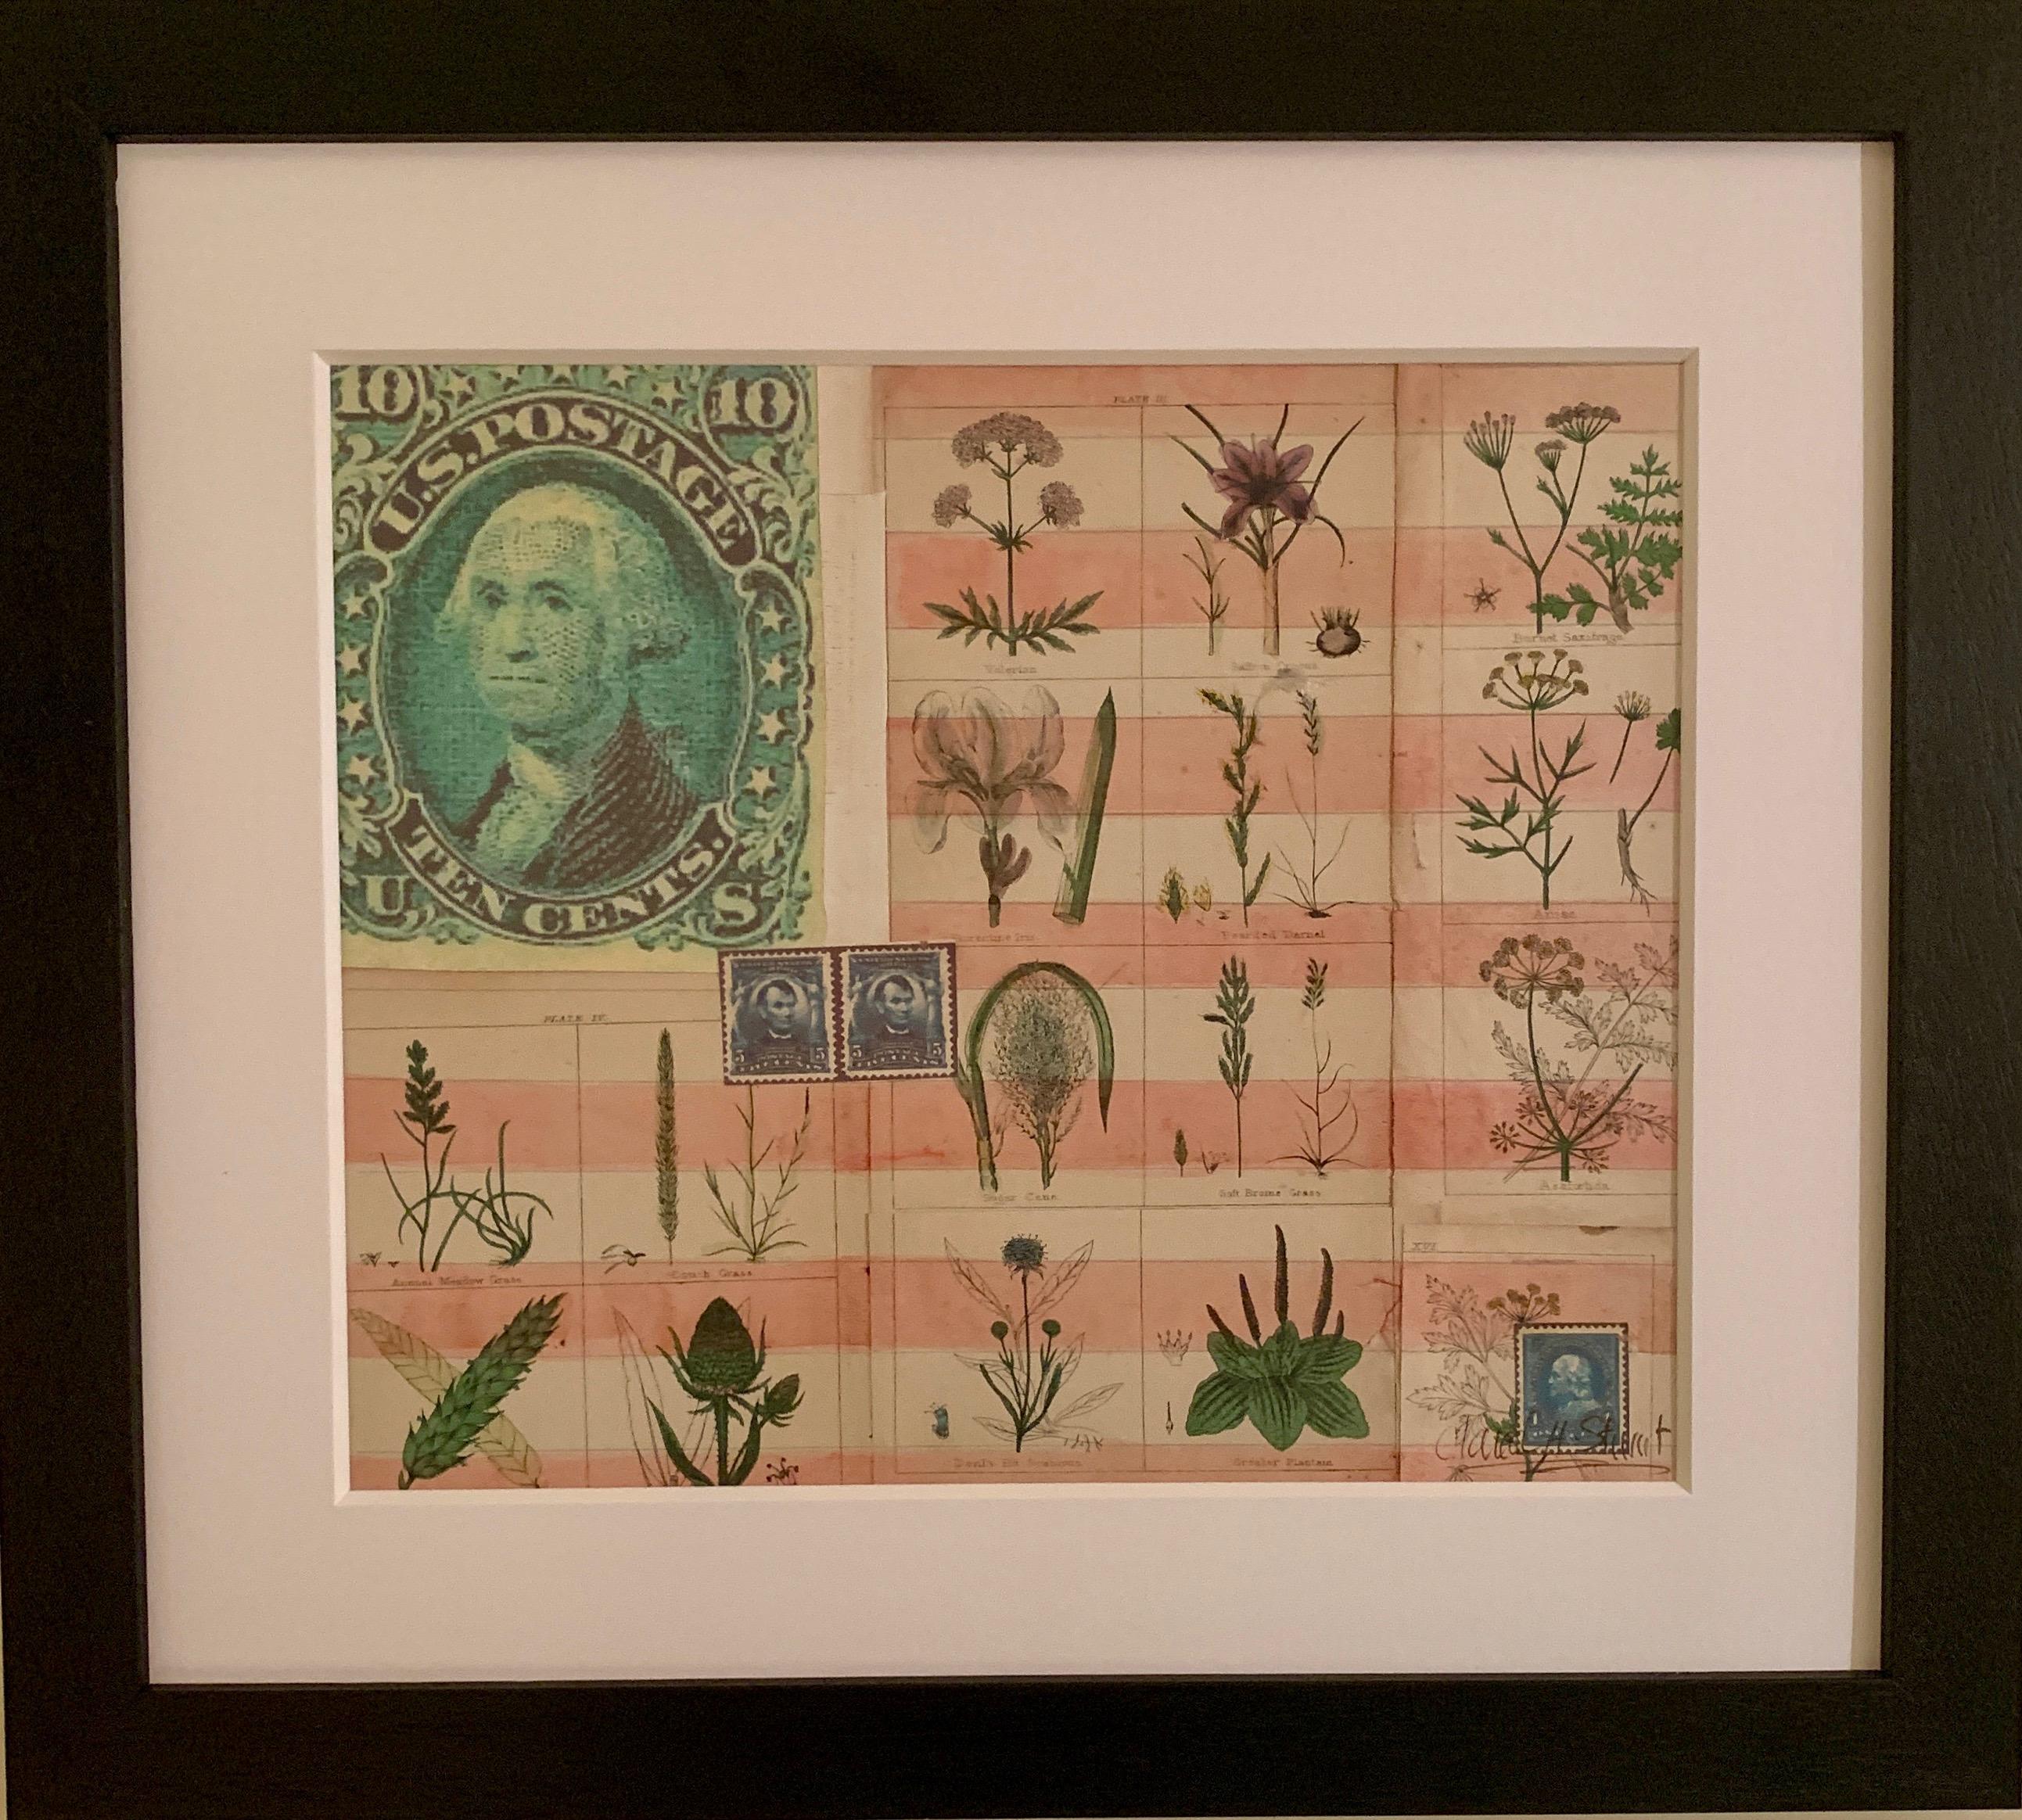 American flag collage with 19th century botanicals hand colored in watercolor  - Mixed Media Art by Claude Howard Stuart